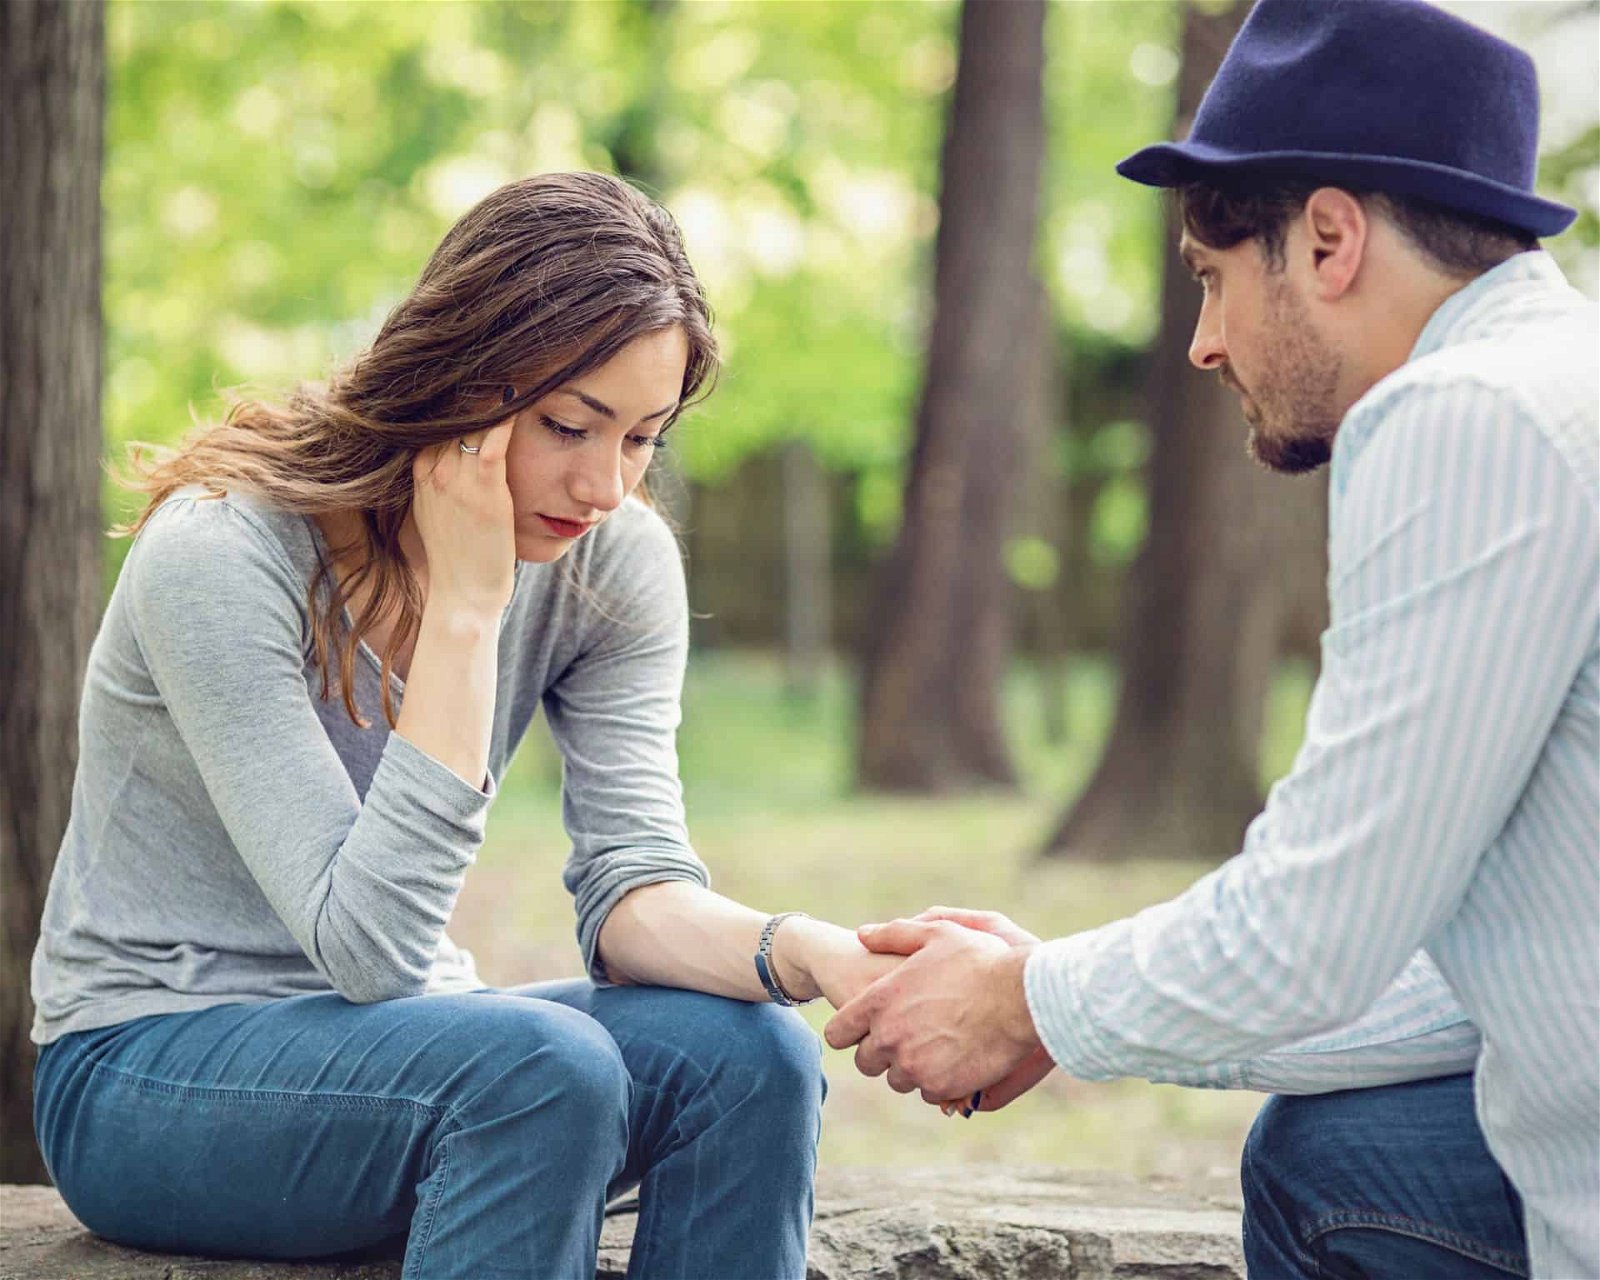 How to Convince an Addicted Spouse to Go to Rehab